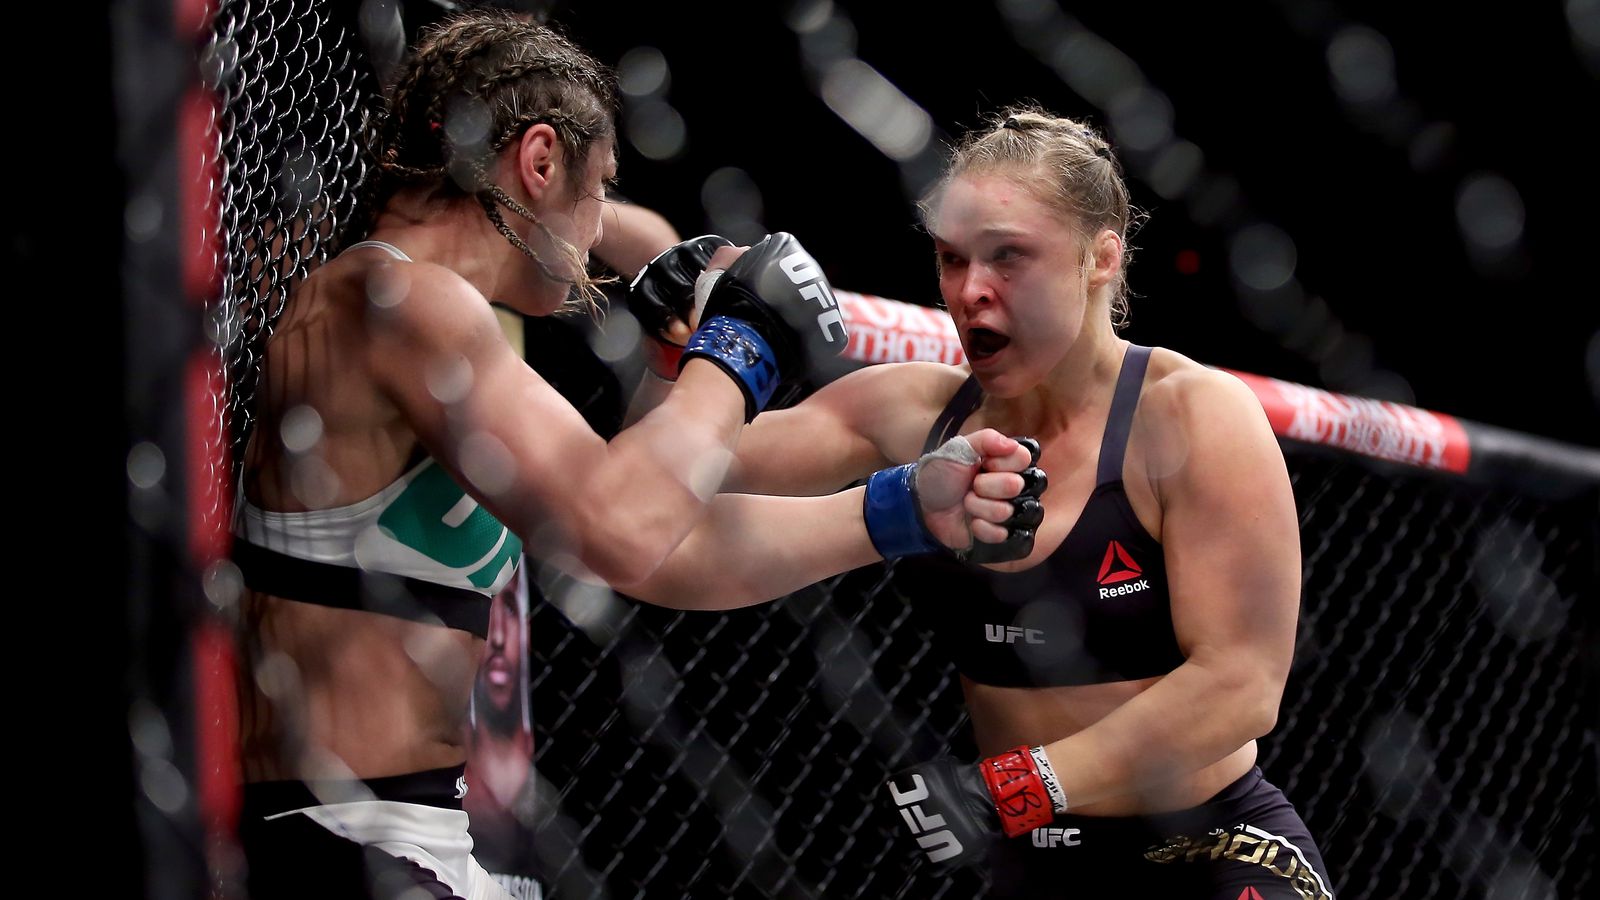 Knockout Ronda Rousey Vs Bethe Correia Full Fight Video Highlights